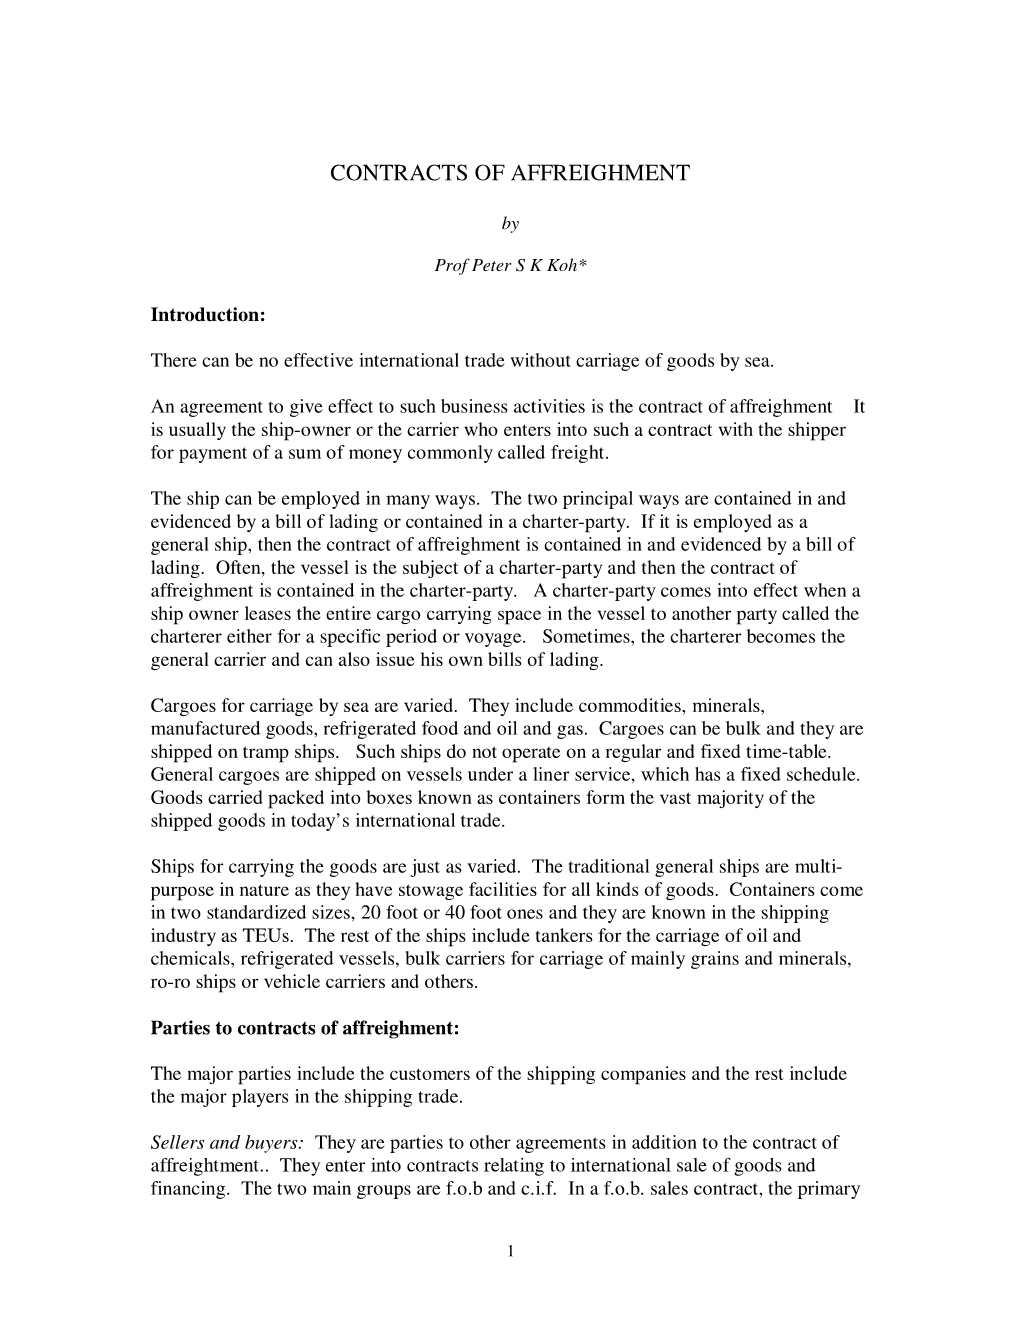 Contracts of Affreighment